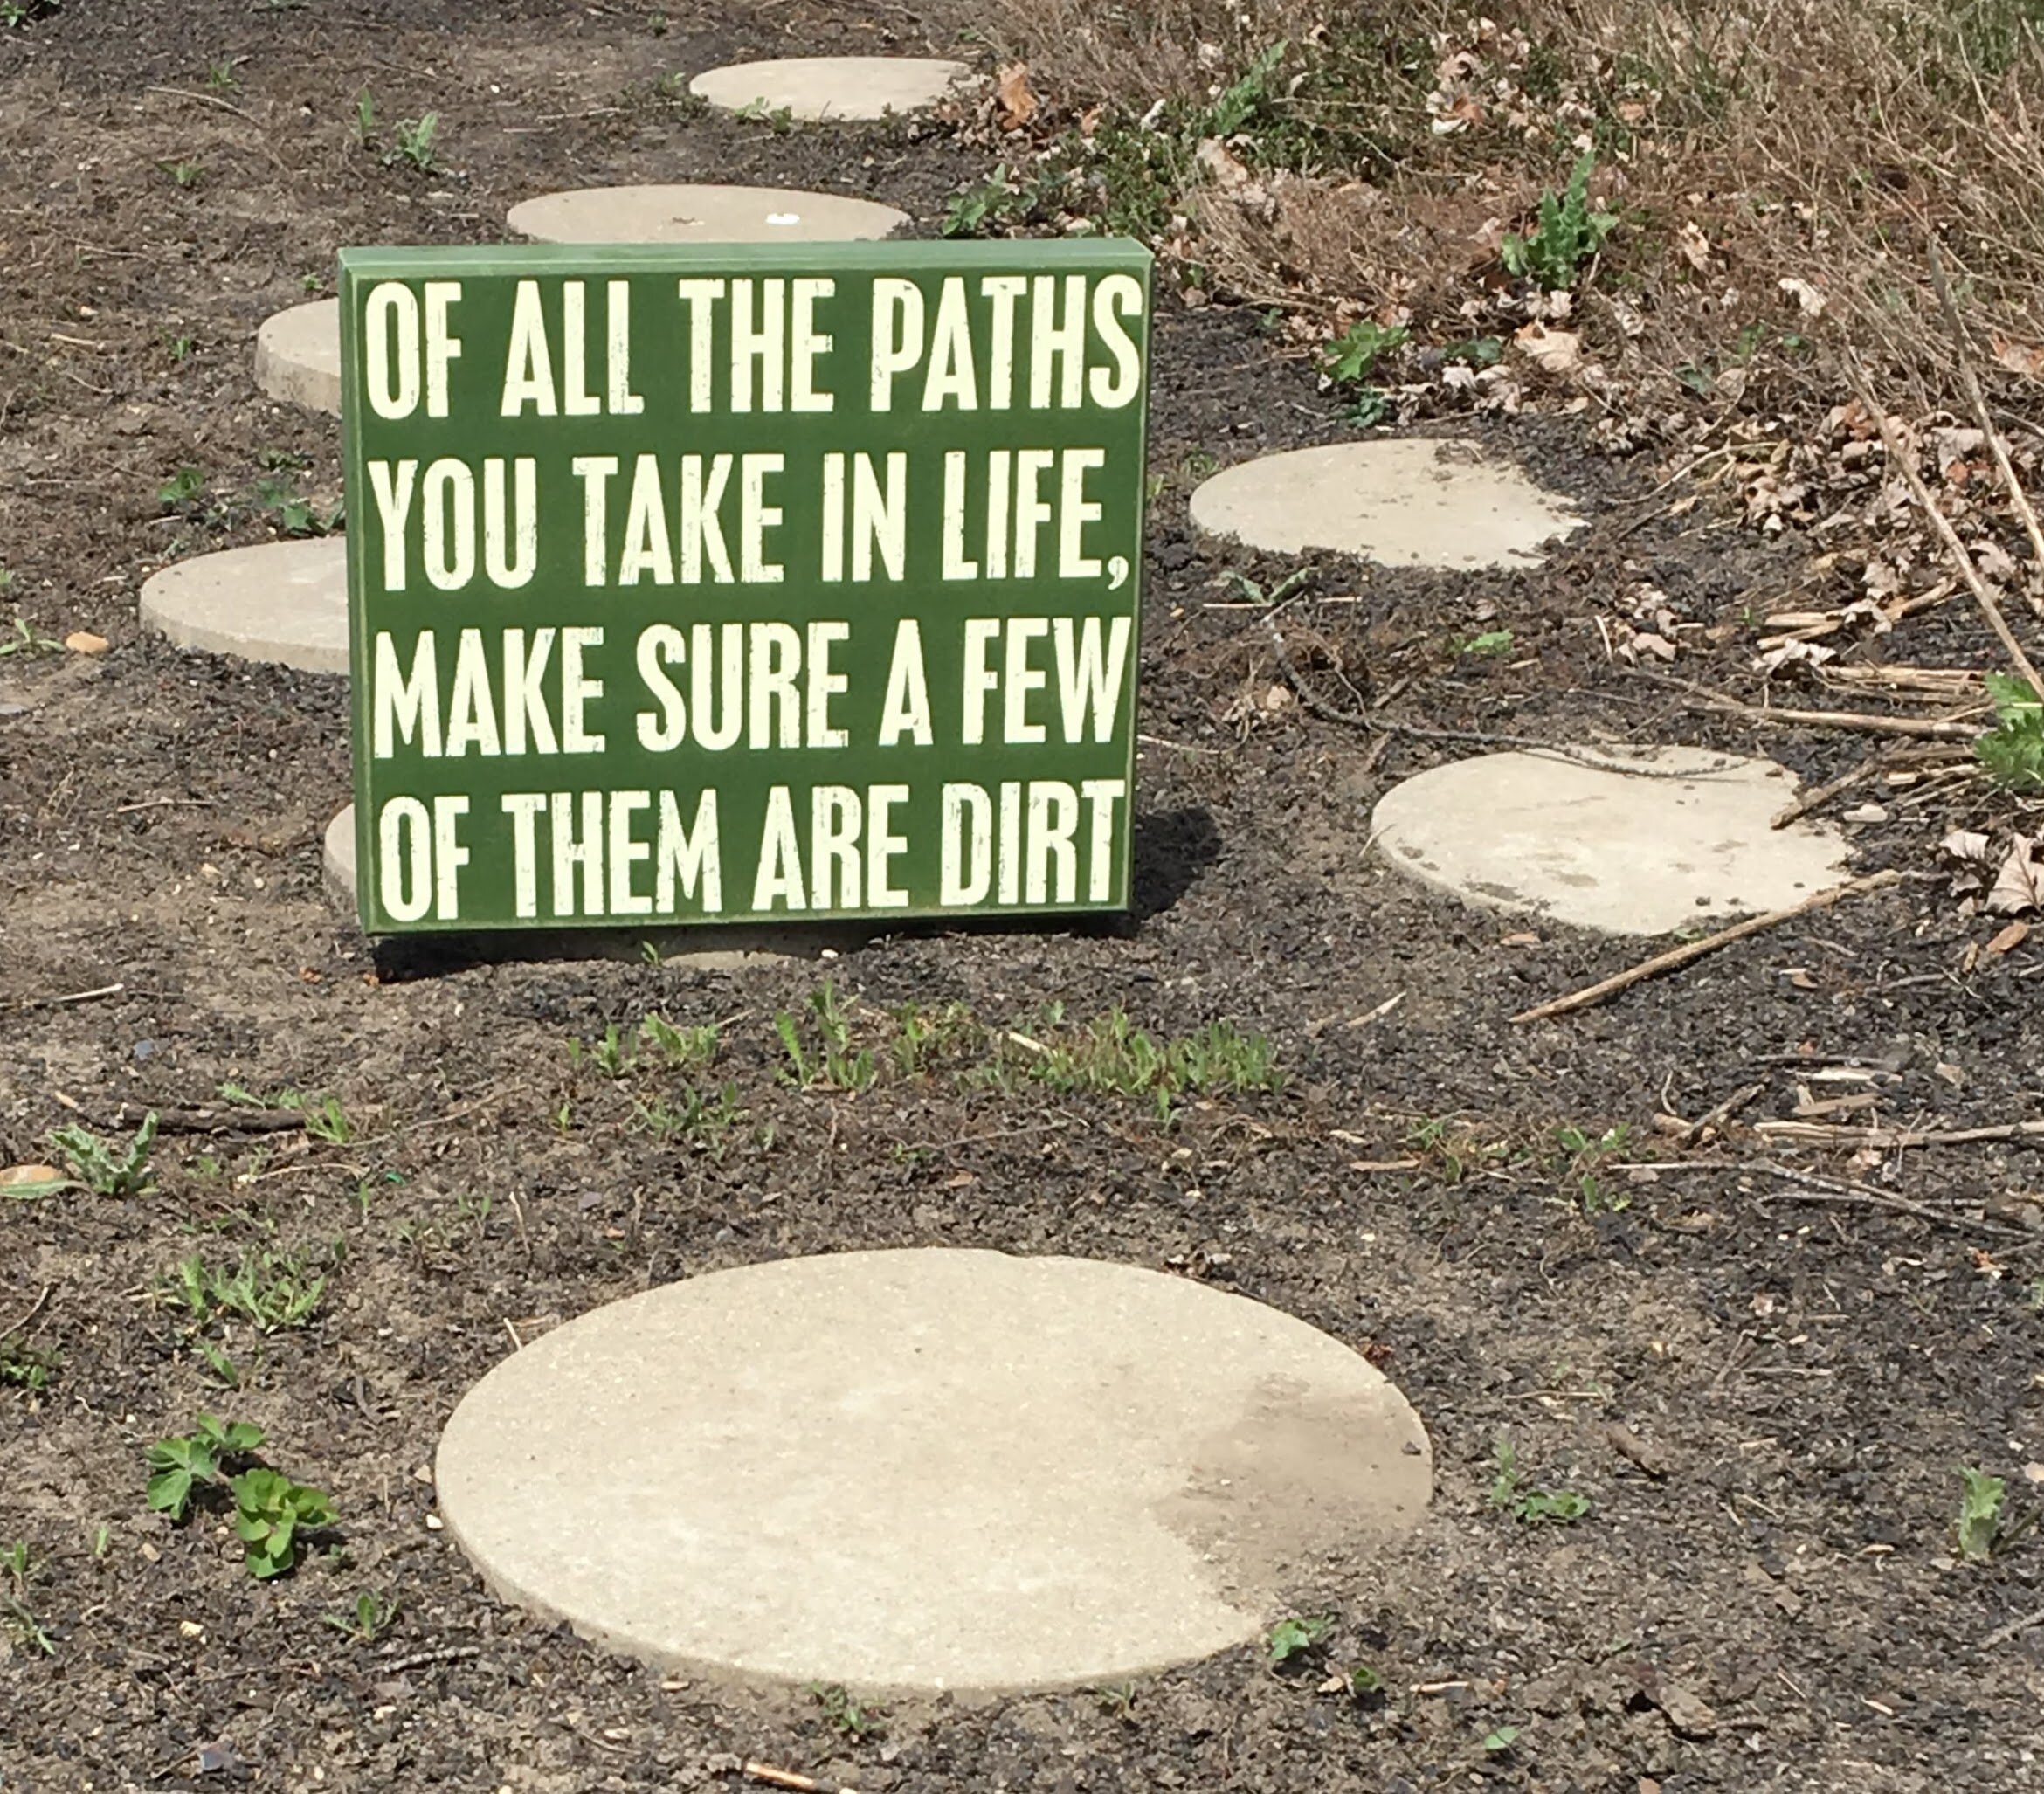  Of all the paths you take in life, make sure a few of them are dirt. 